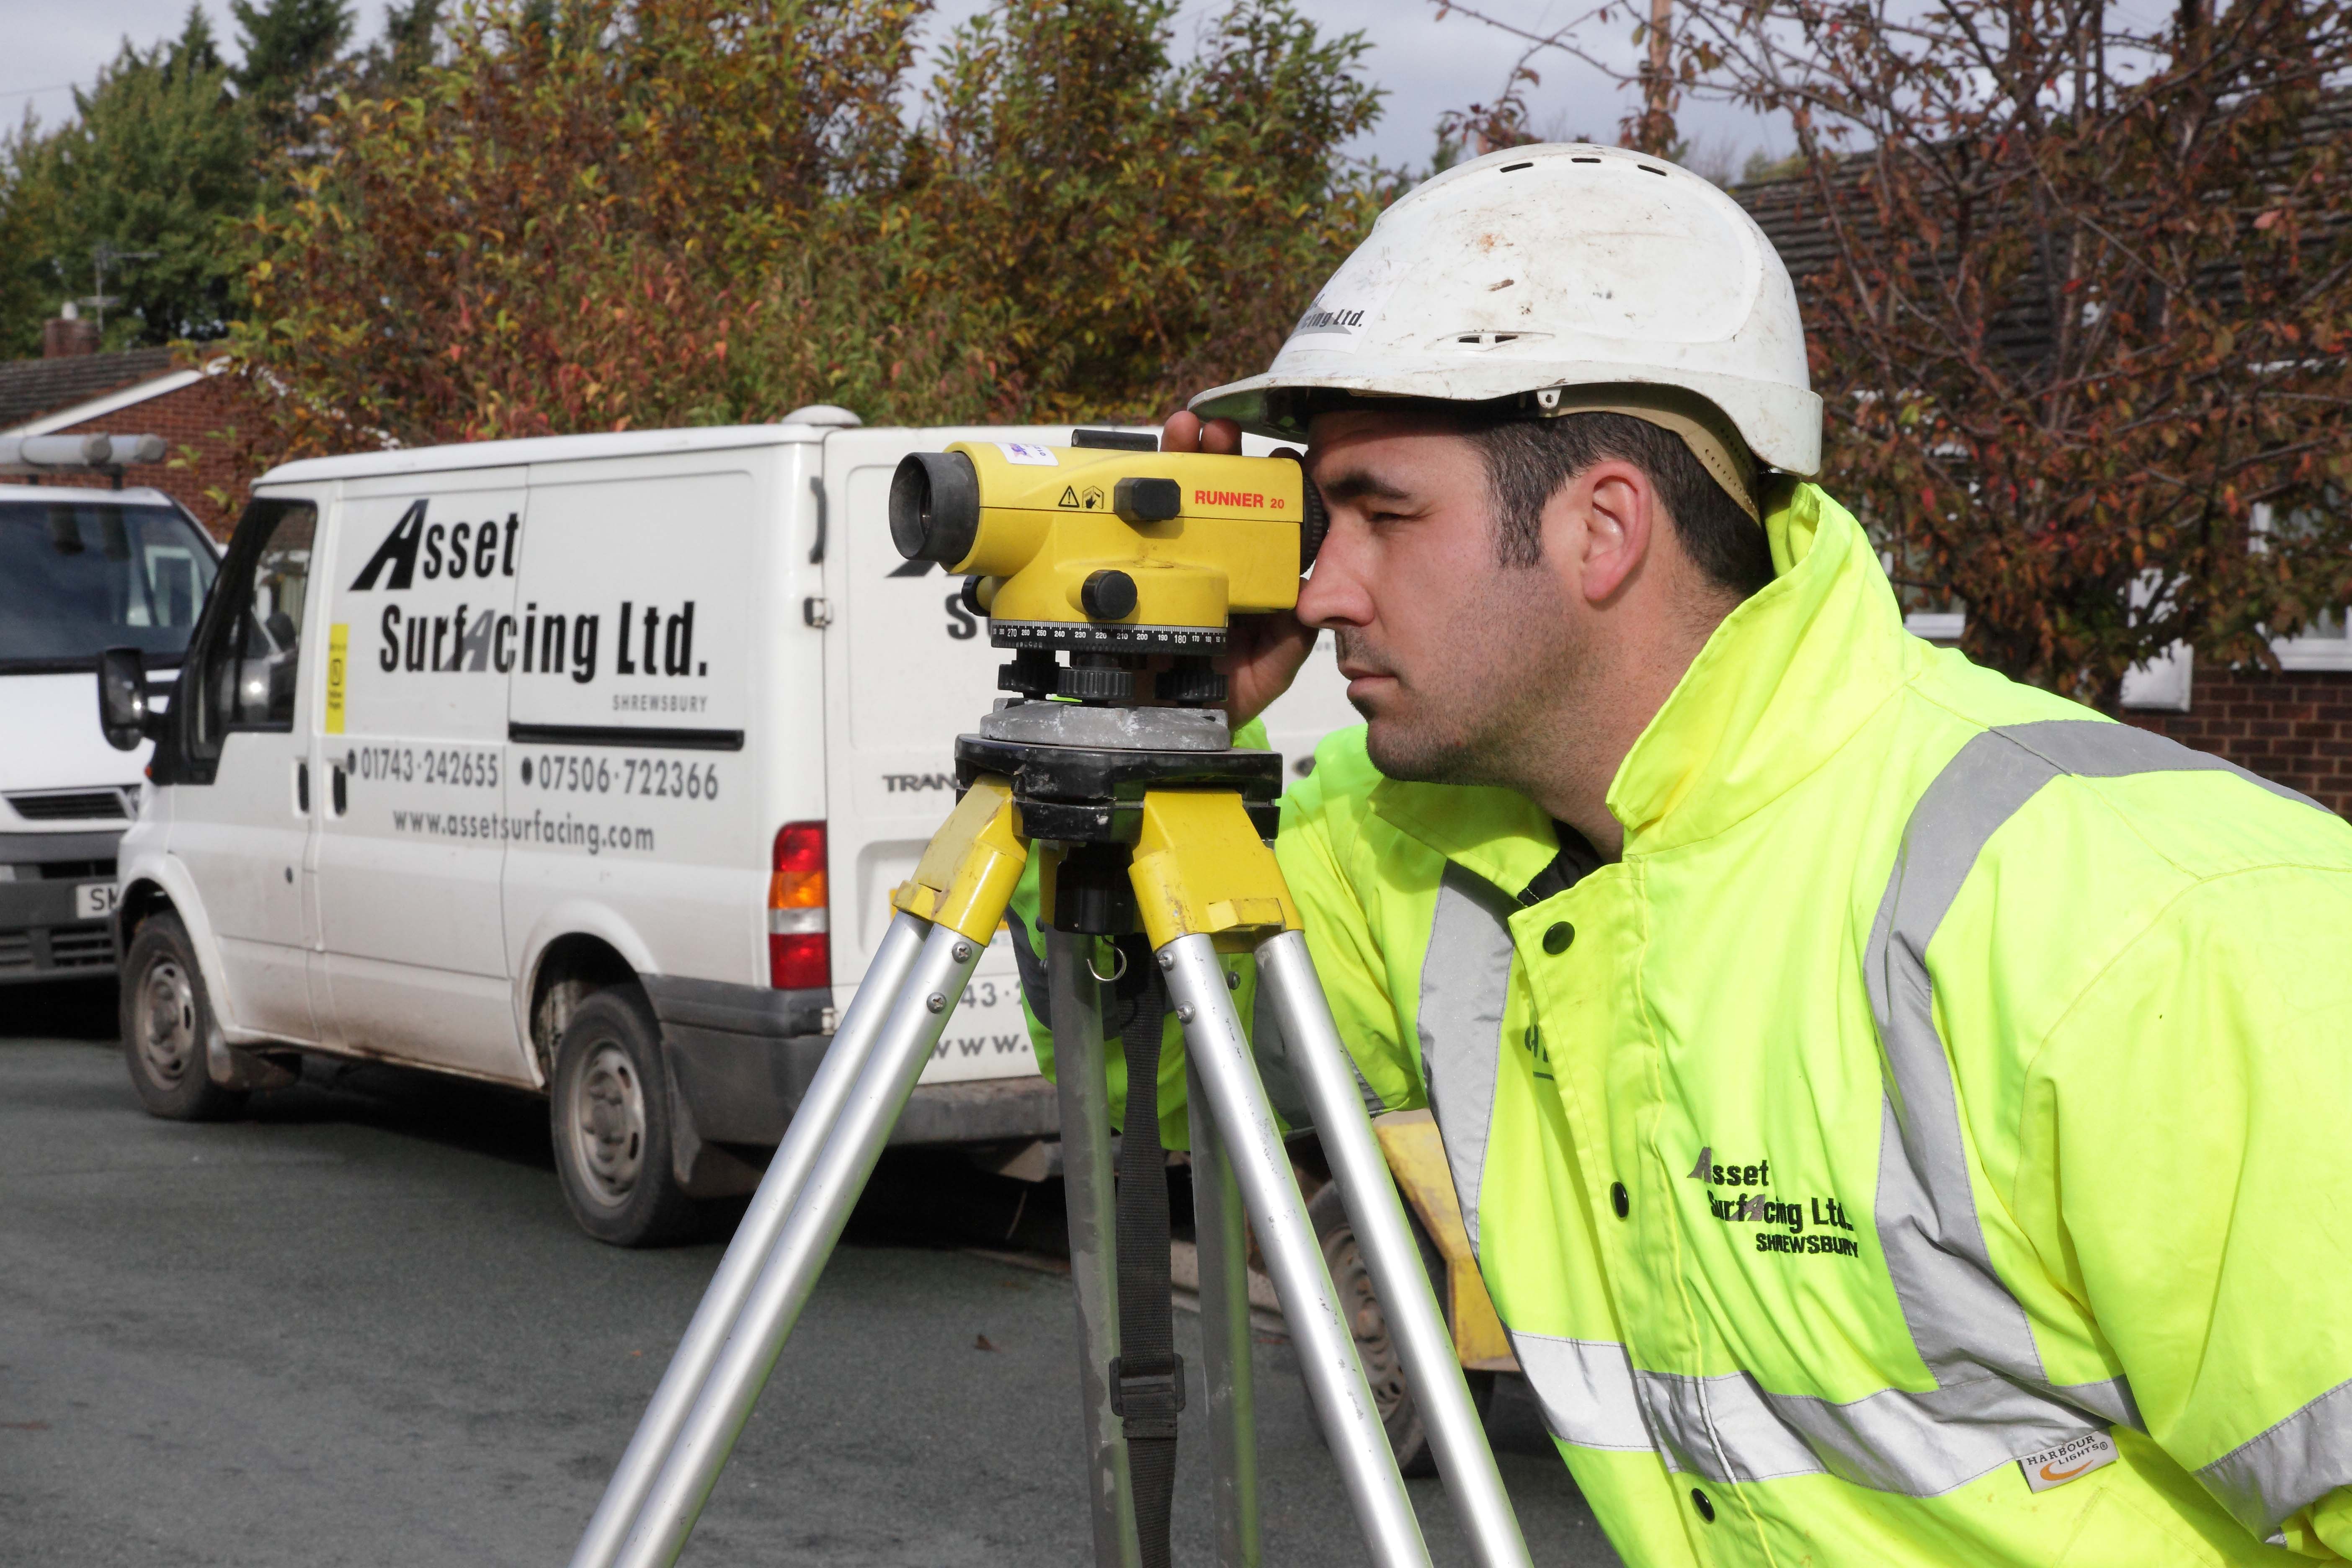 Shot for Asset Surfacing Ltd of Shrewsbury for their Yellow Pages website advert